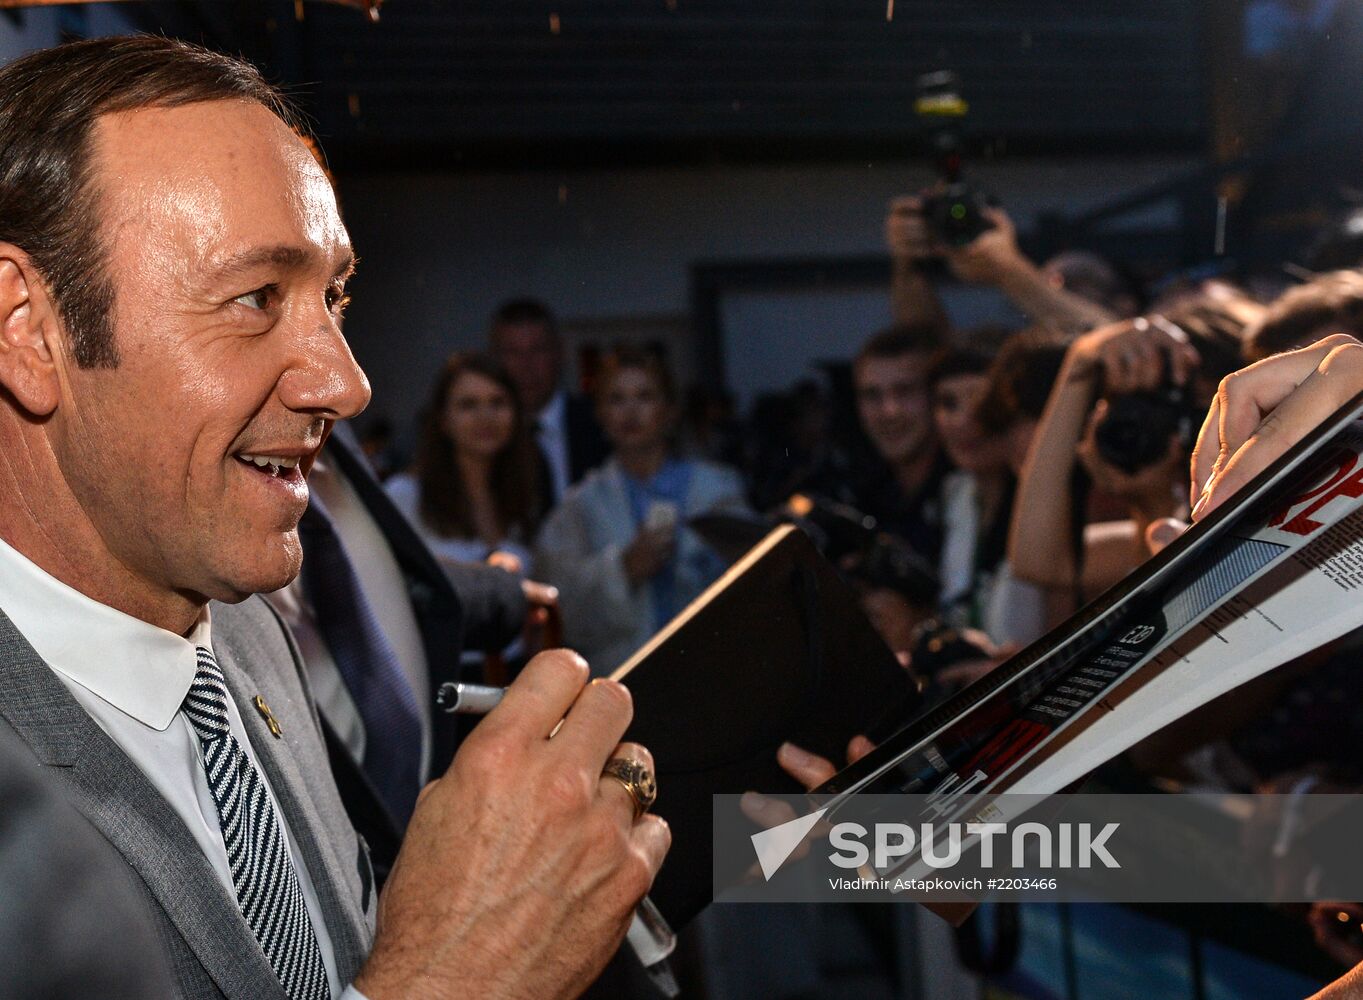 Actor Kevin Spacey visits Moscow